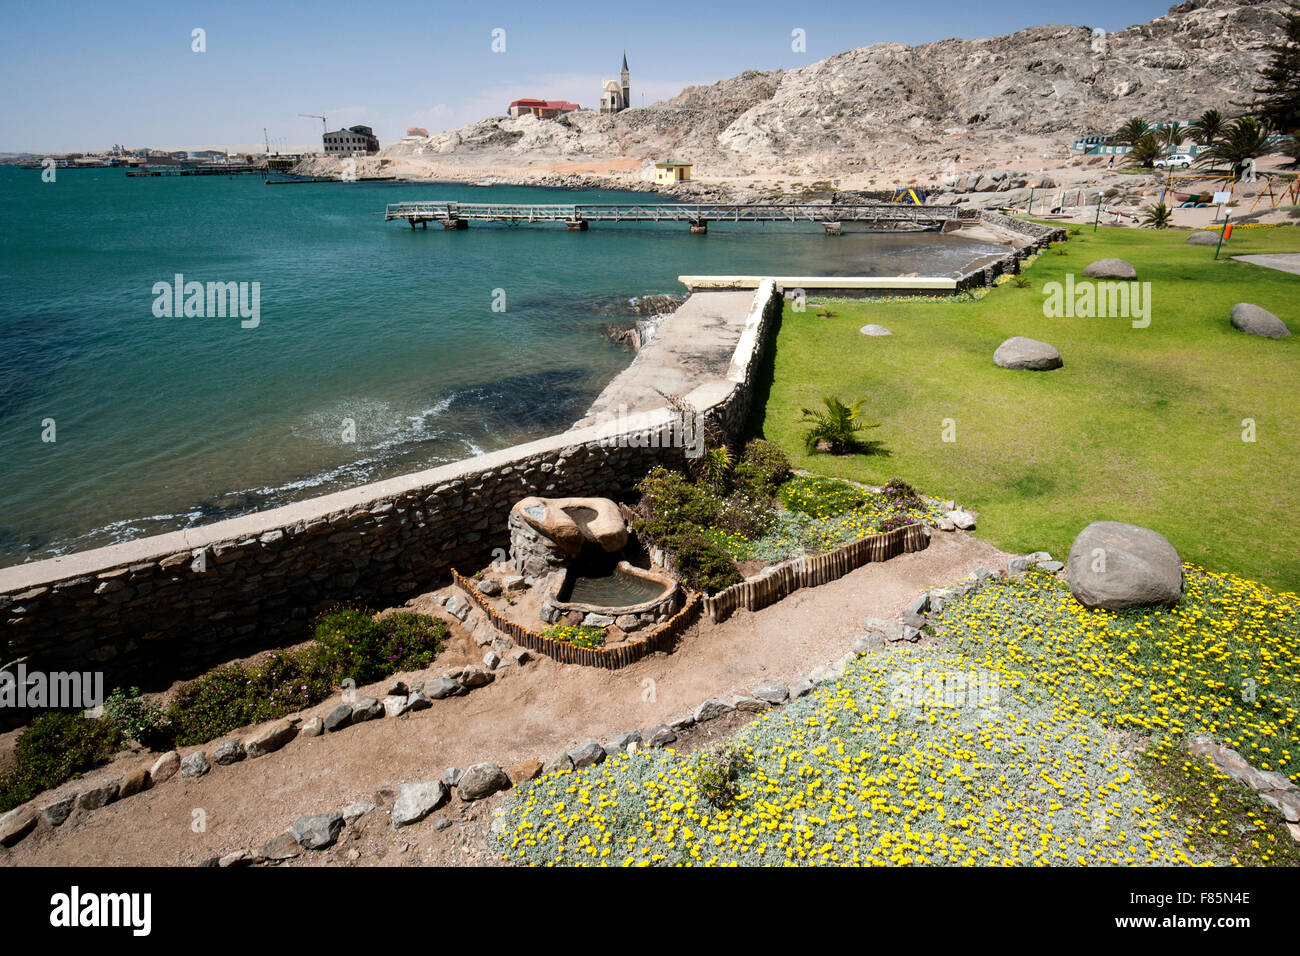 View from the Luderitz Nest Hotel - Luderitz, Namibia, Africa Stock Photo